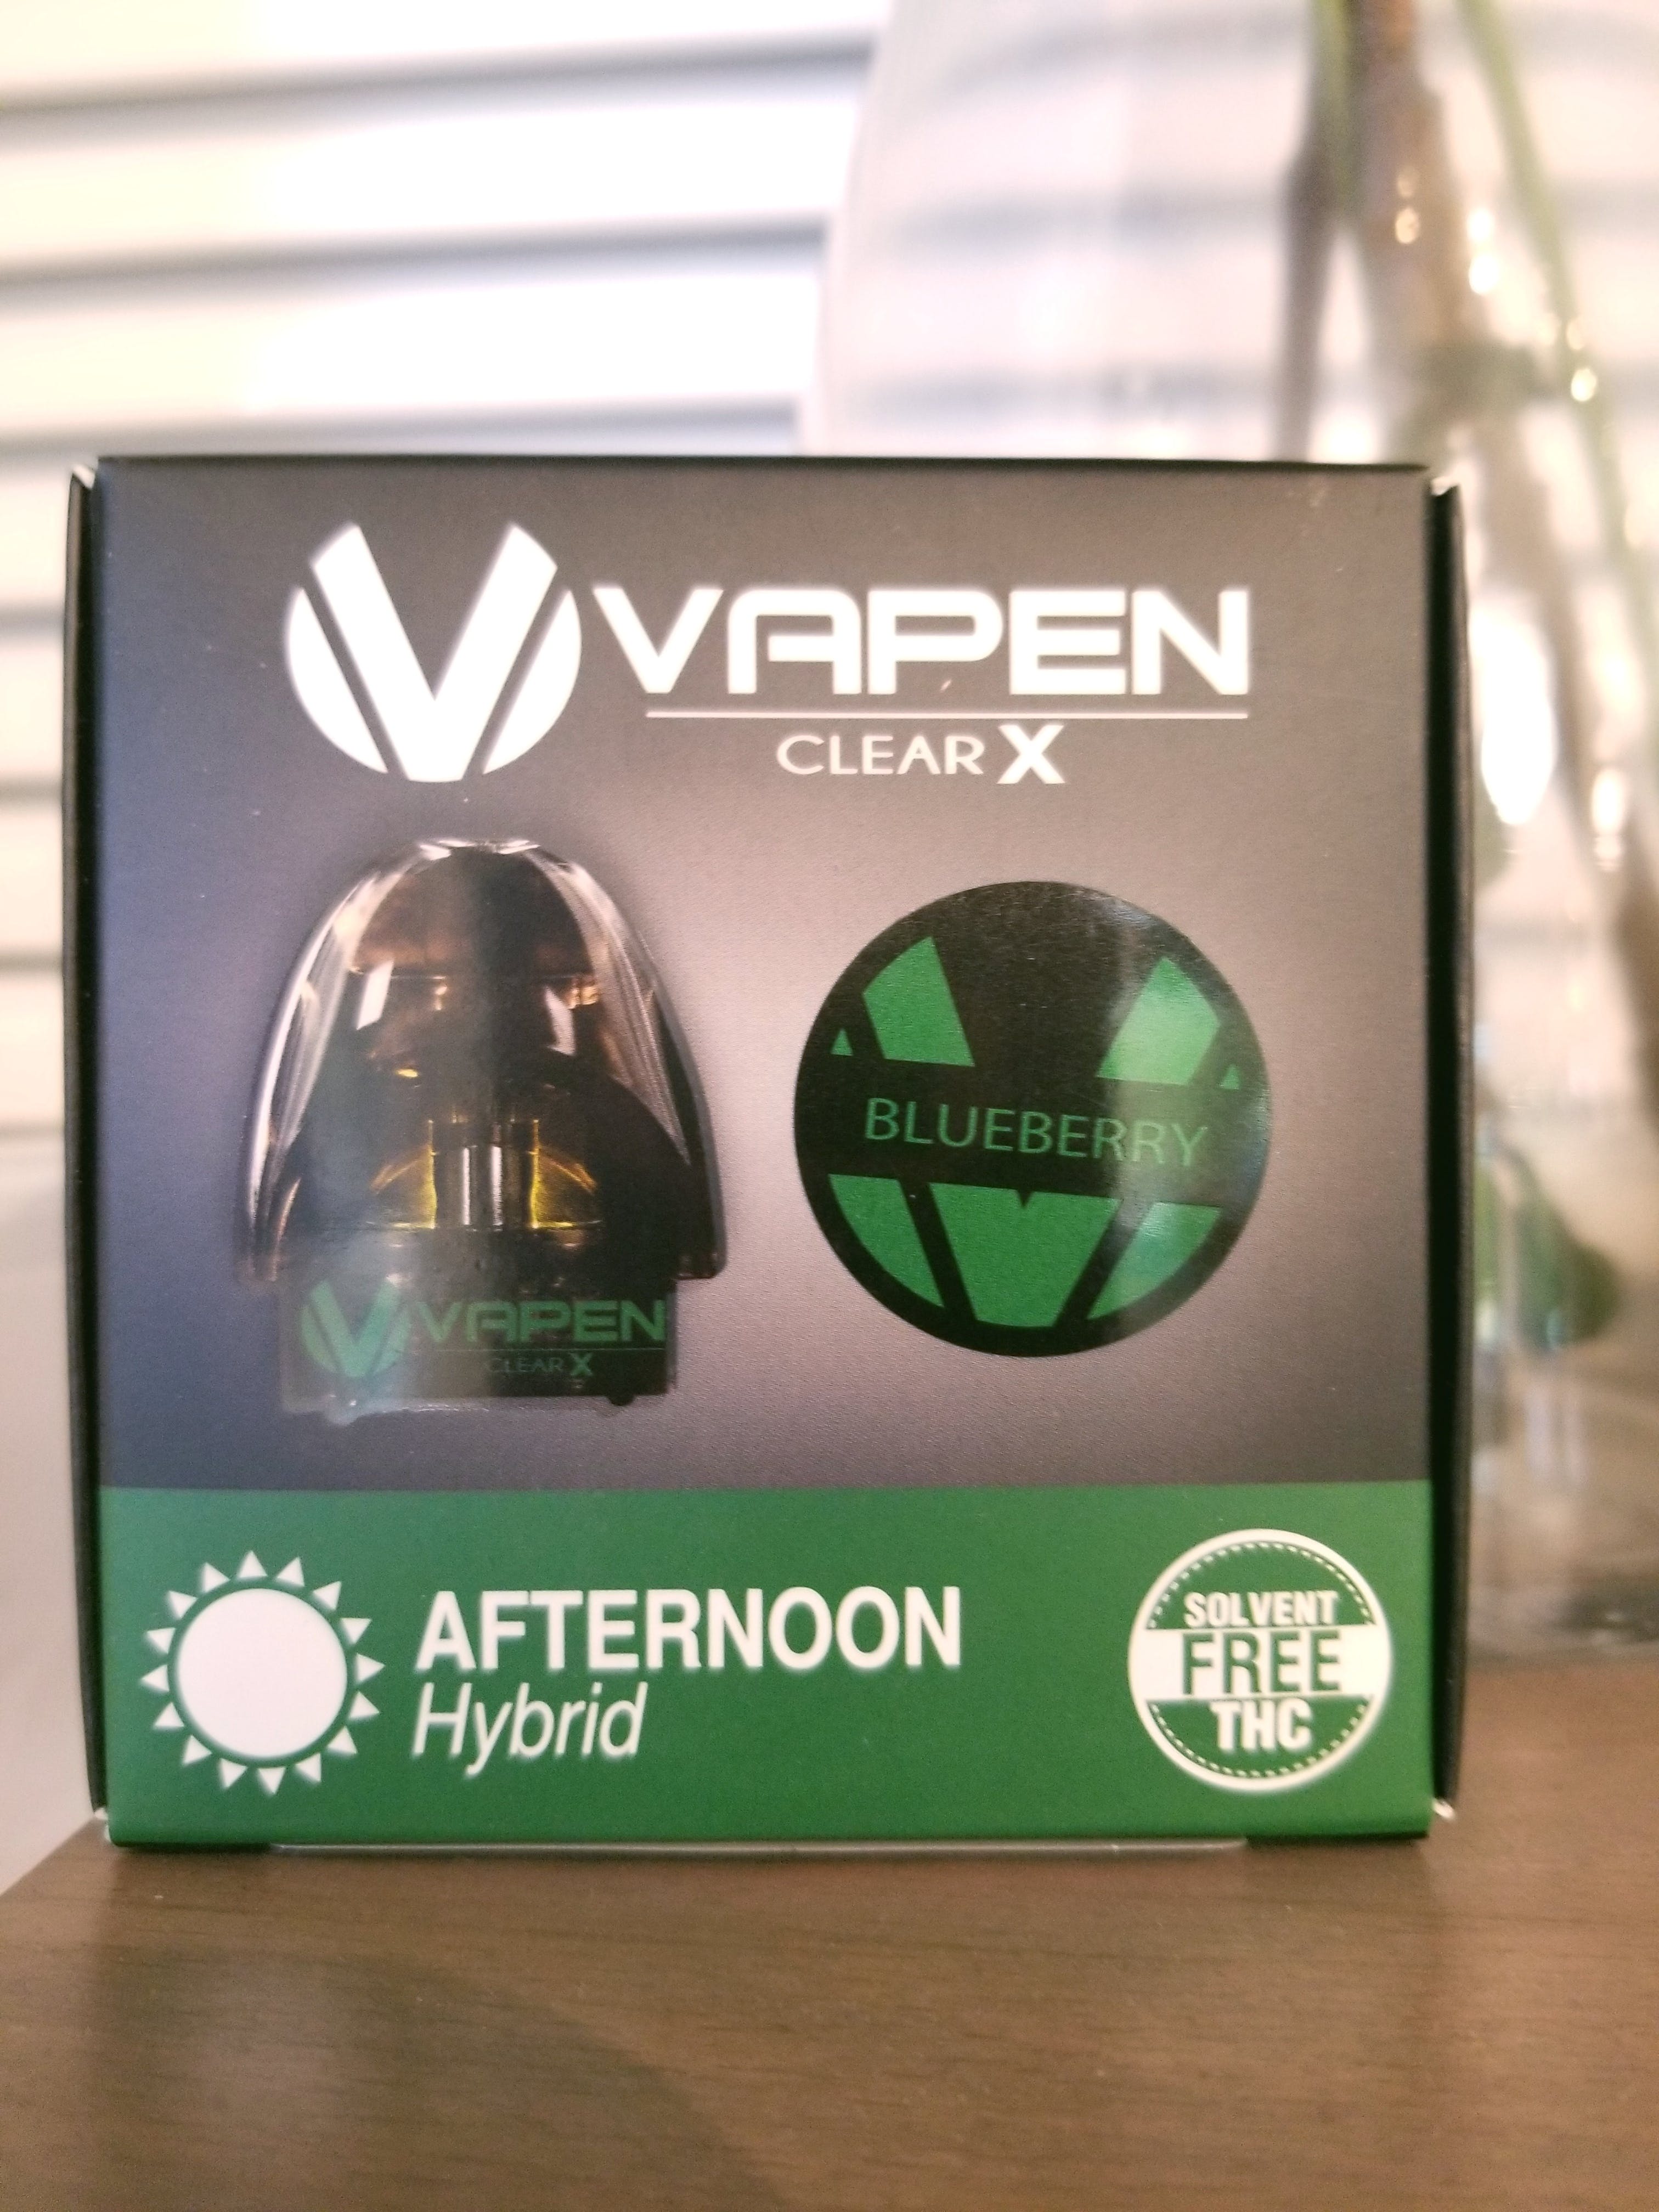 concentrate-vapen-clear-x-blueberry-hybridafternoon